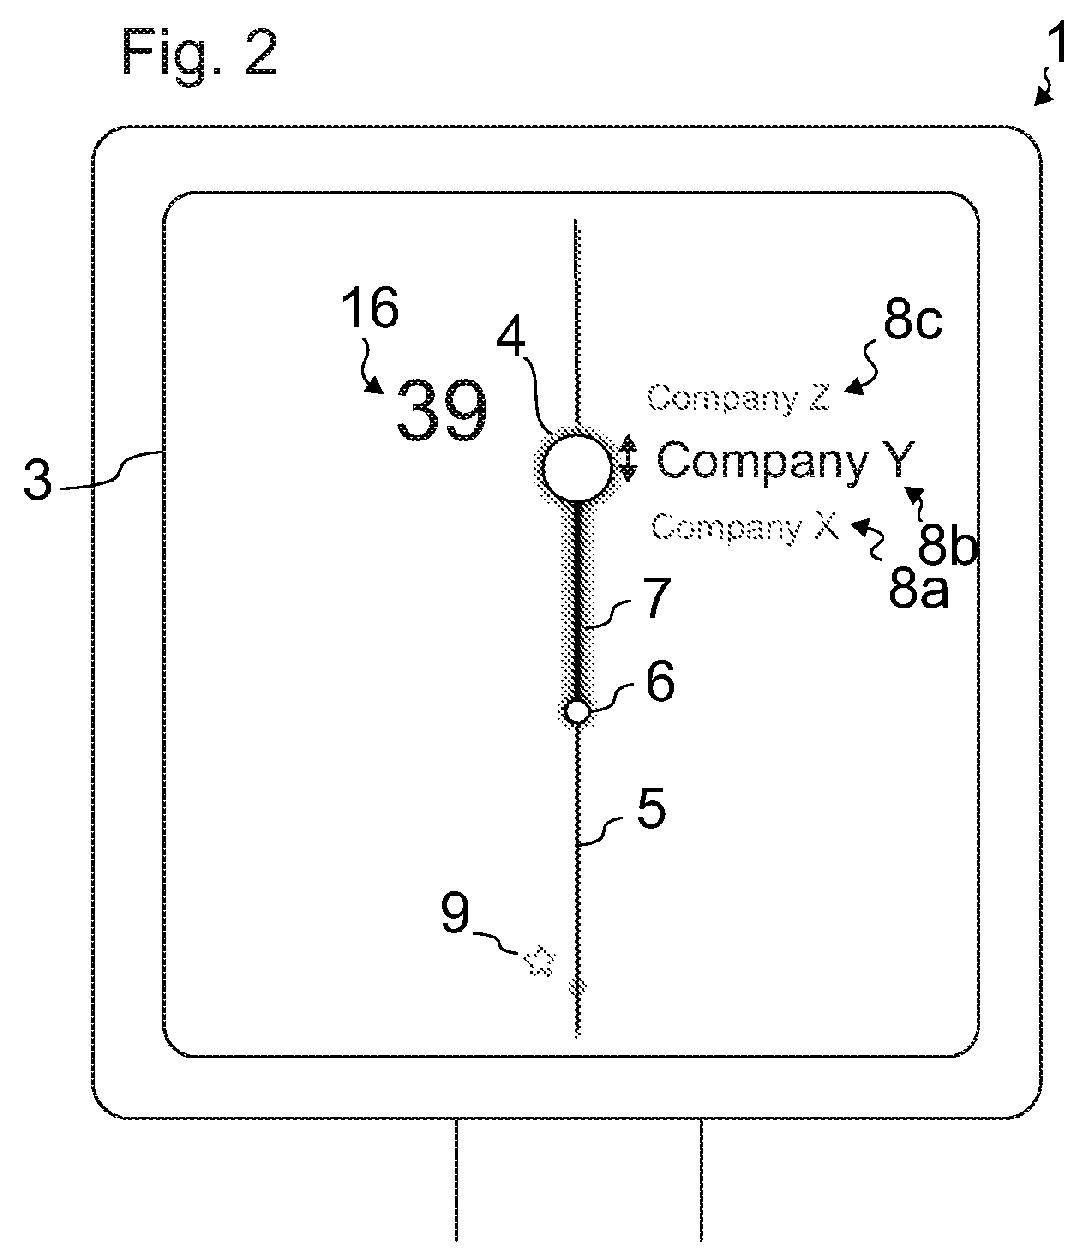 Touch-sensitive call-giving device